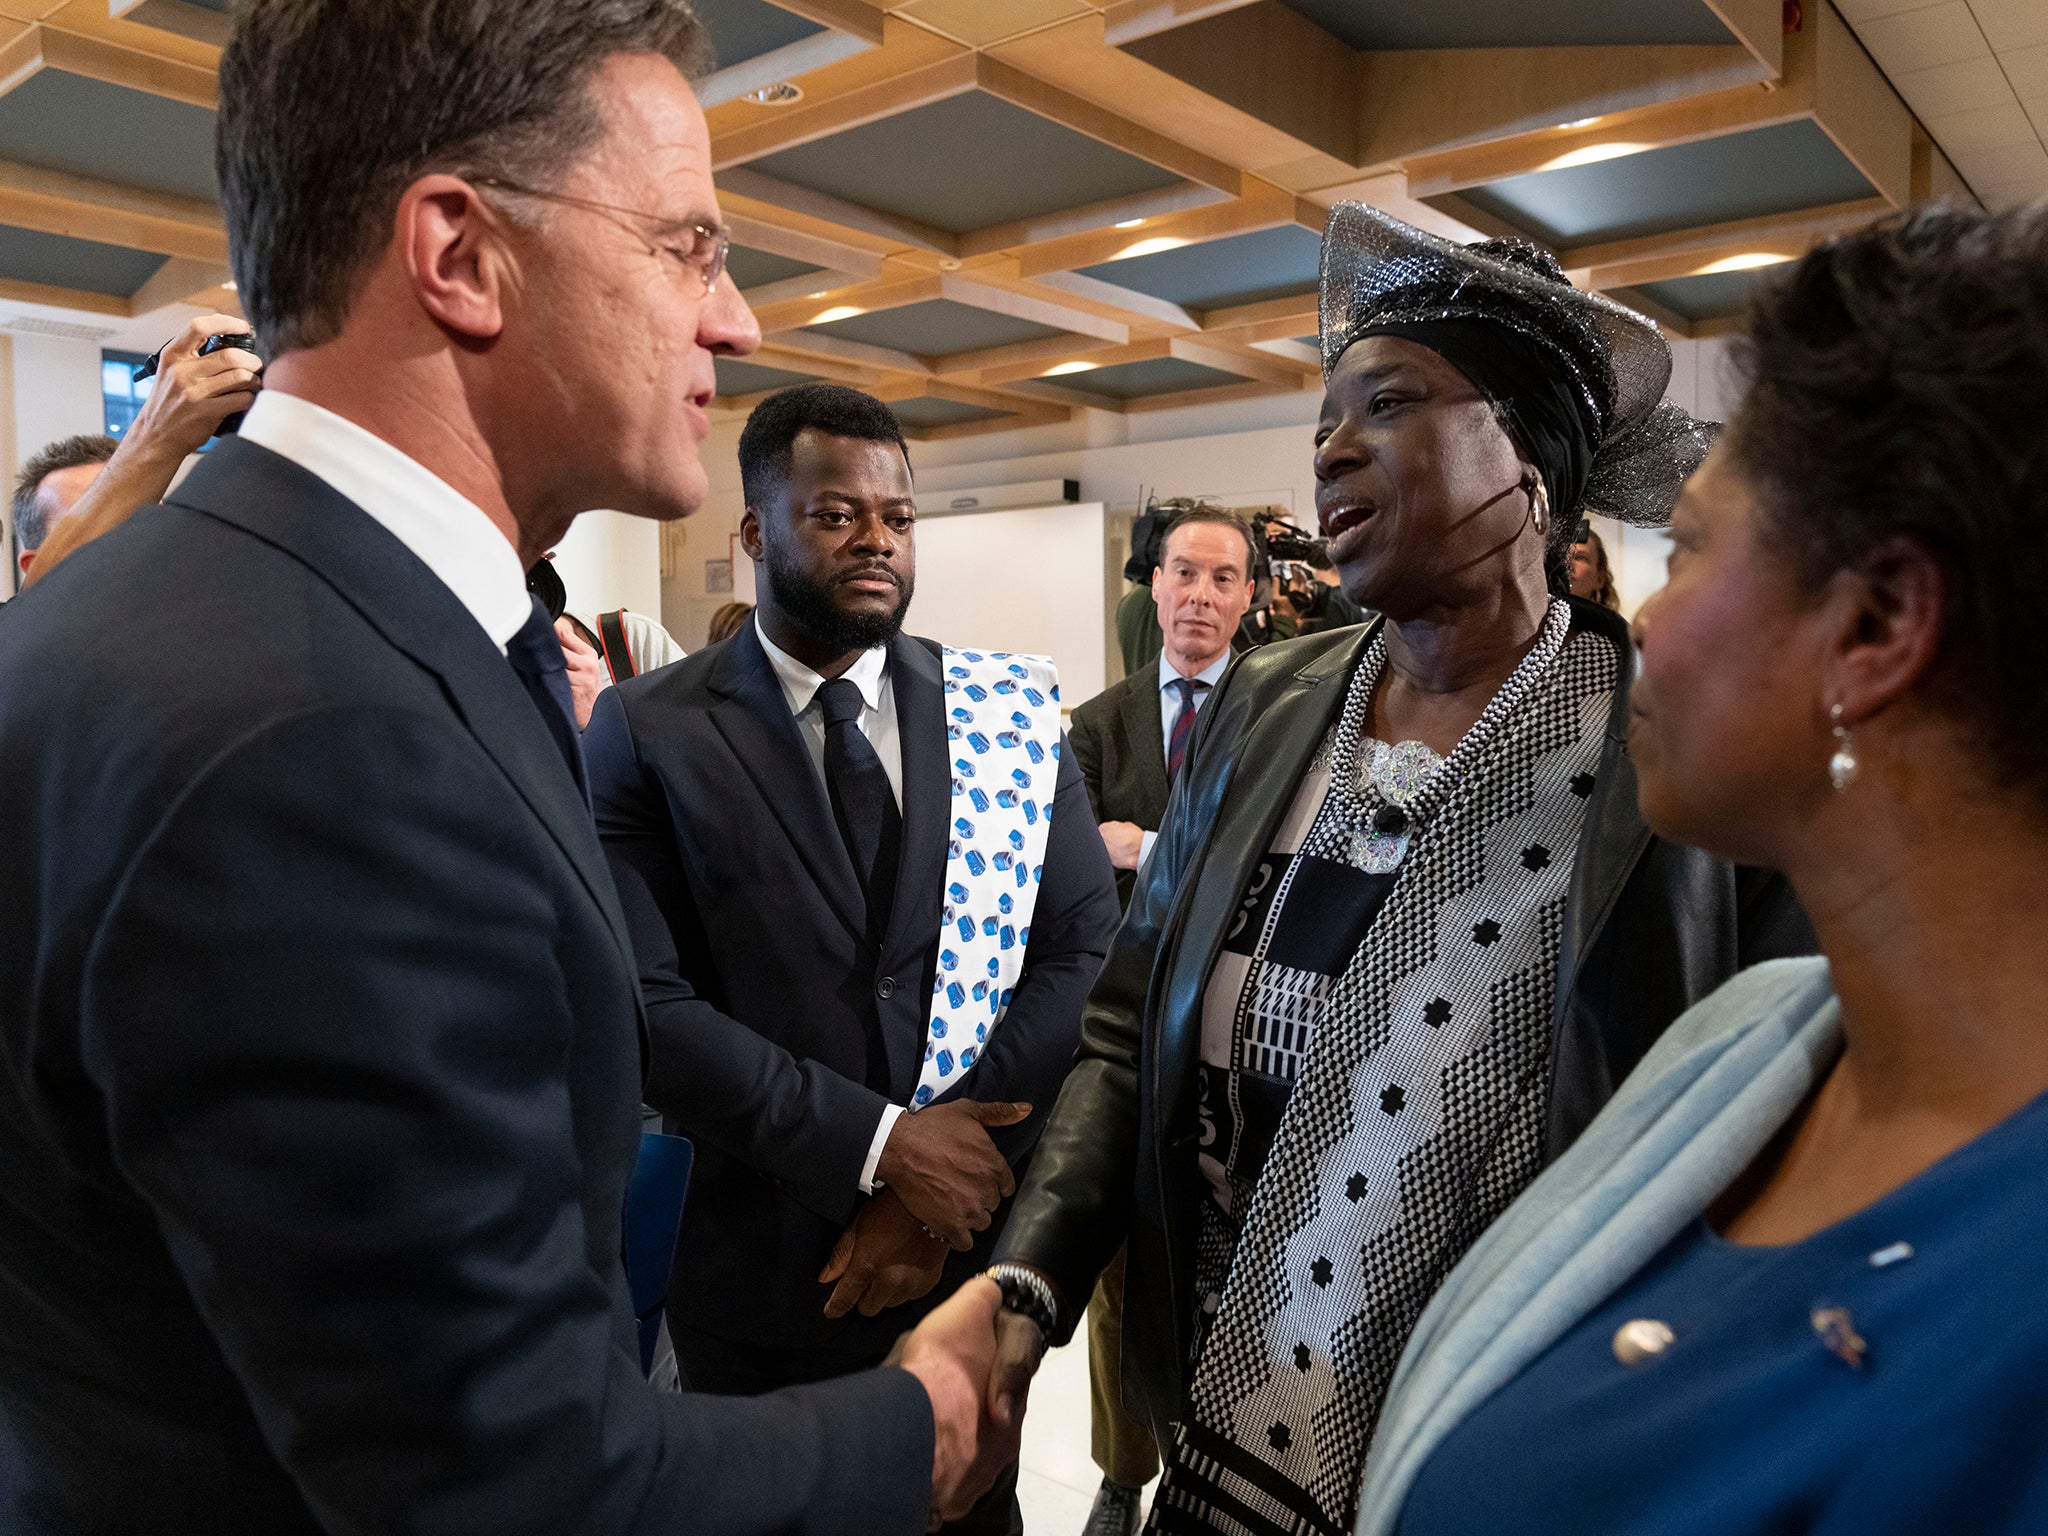 Dutch PM Rutte, left, shakes hands with Marian Markelo, a Winti Priest, an Afro-Surinamese traditional religion, second right, after apologising for the Netherlands’ historical role in slavery